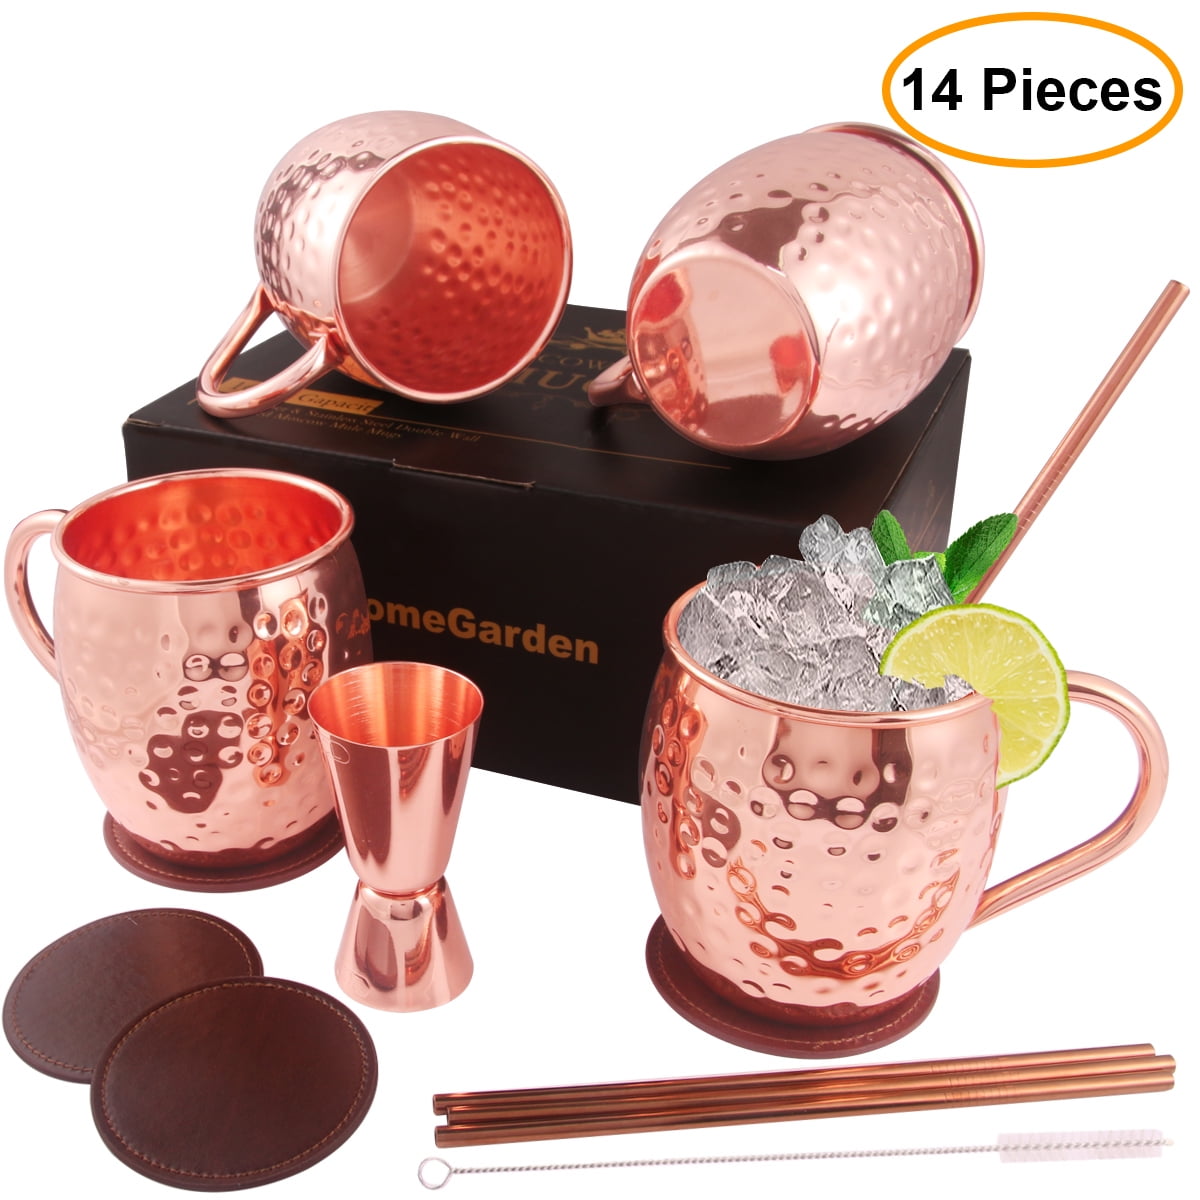 100% Solid Copper Krown Kitchen 16 oz Hammered Moscow Mule Copper Mugs Set of 2